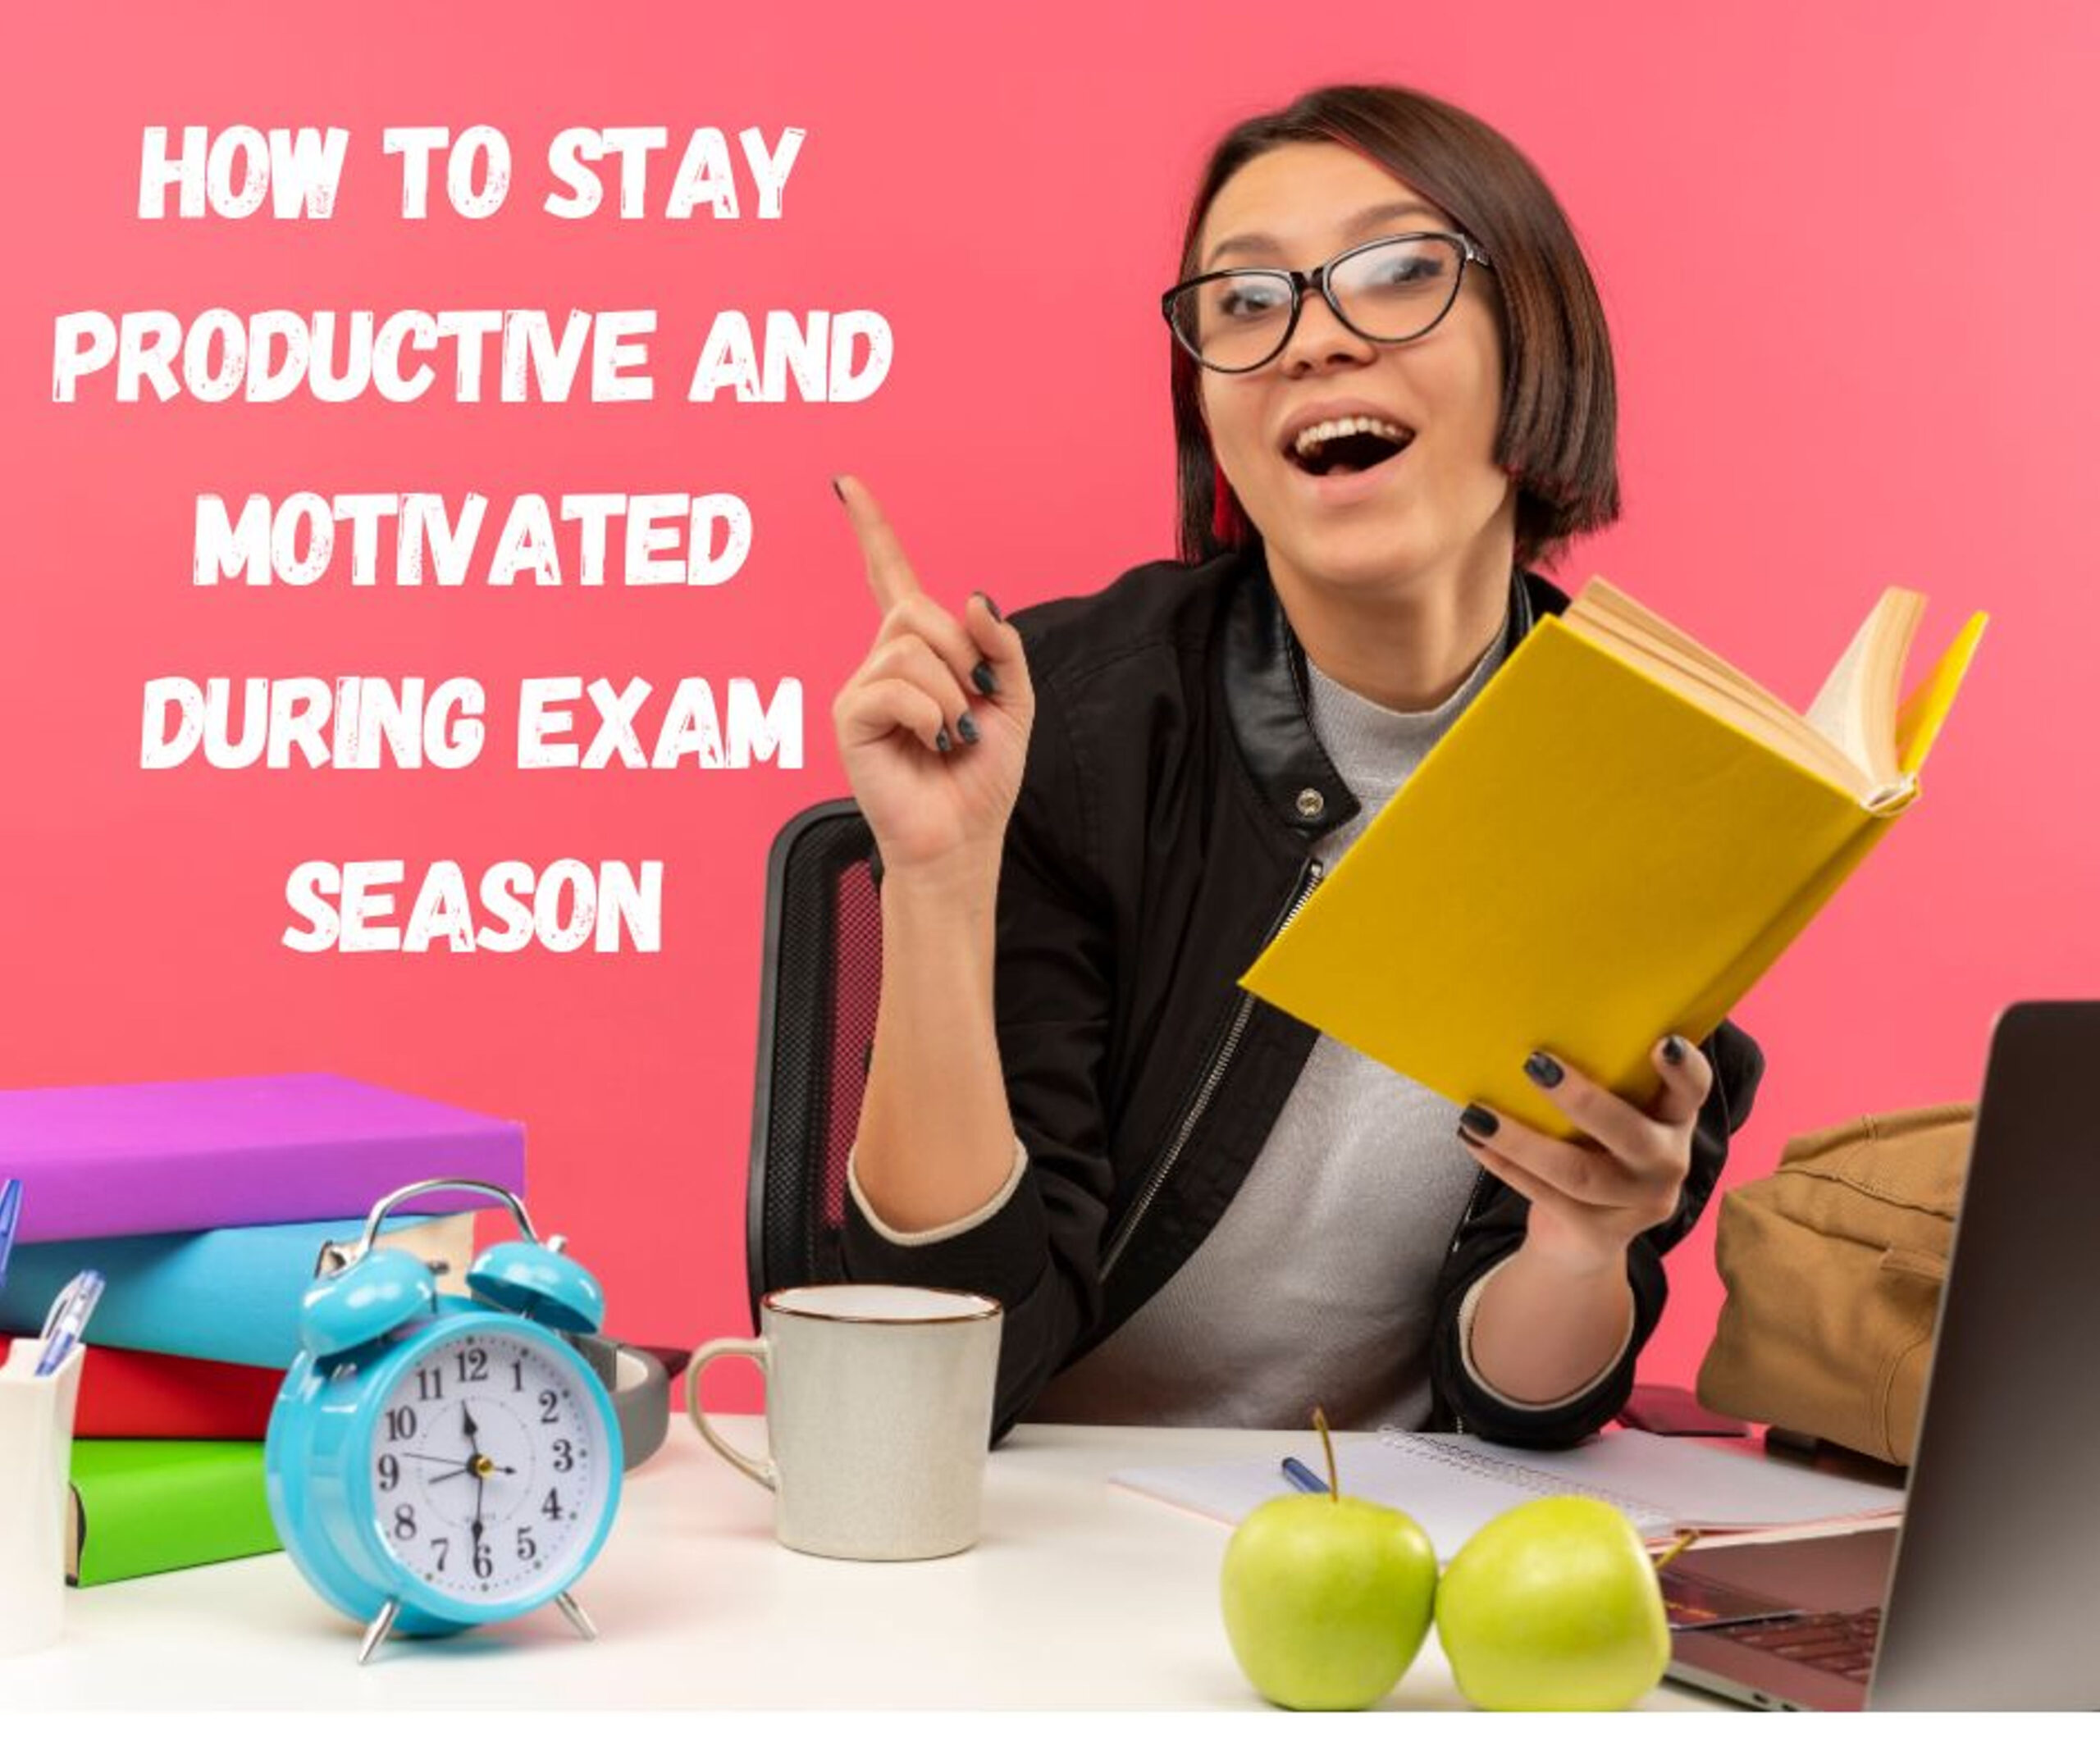 How to Stay Productive and Motivated During Exam Season